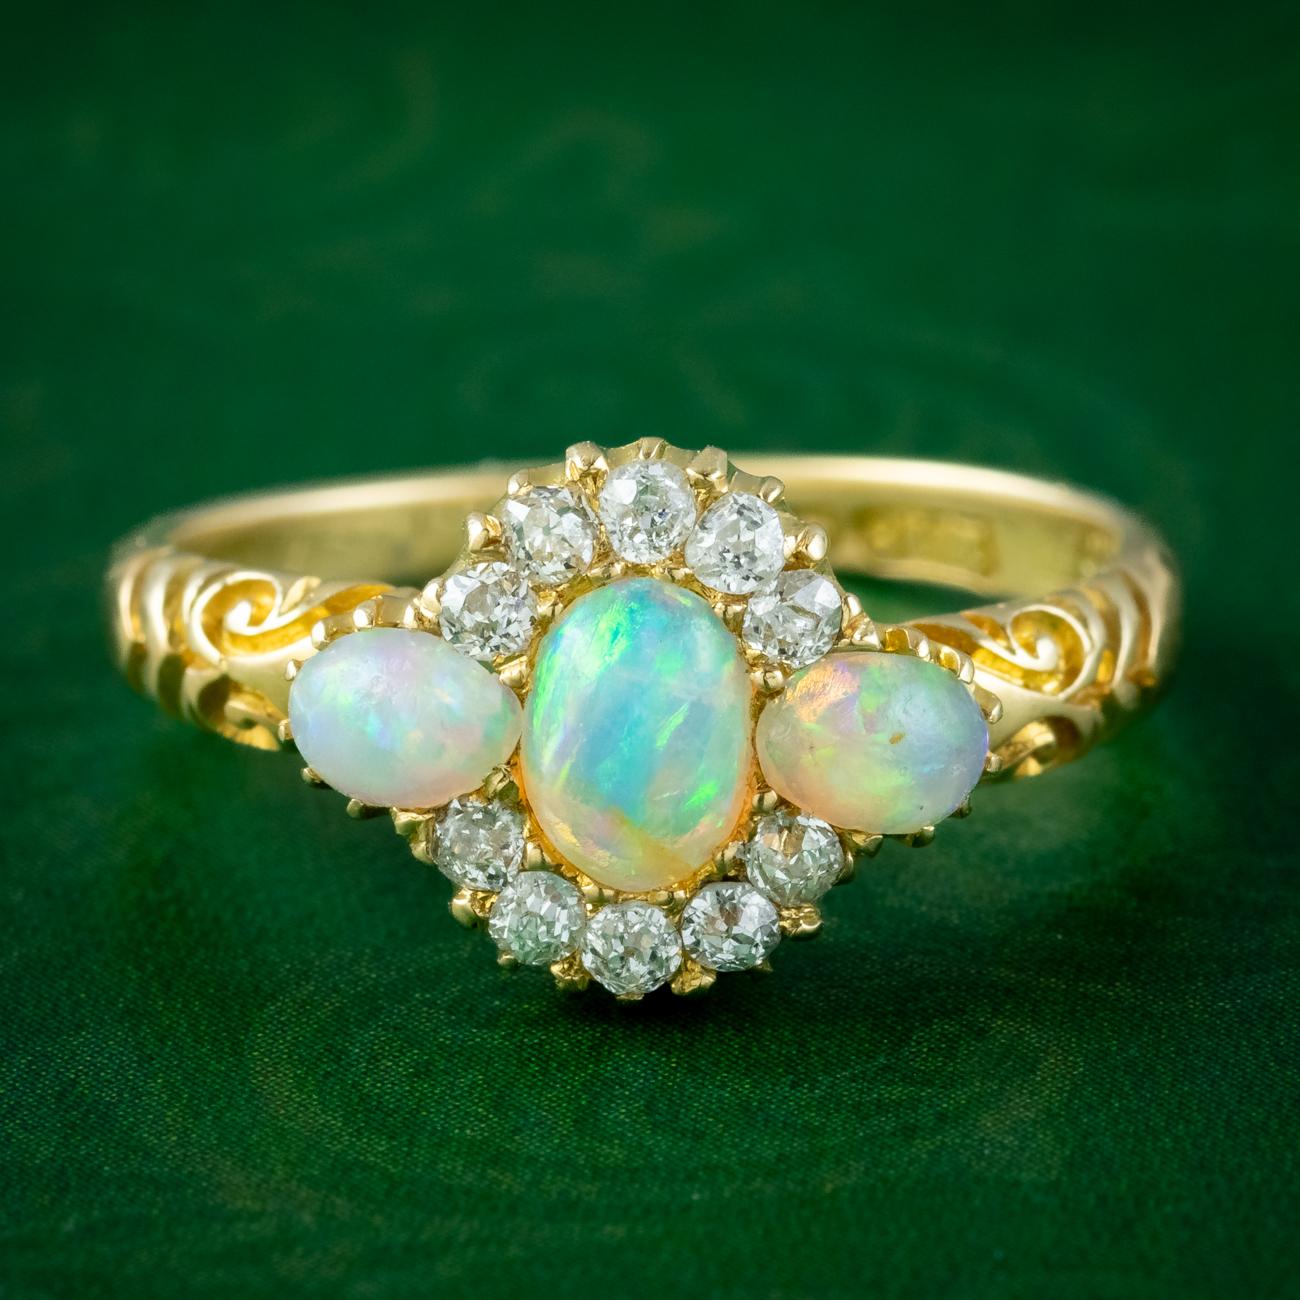 A fabulous antique late Victorian cluster ring adorned with a trilogy of natural opal cabochons along the centre (approx. 0.70ct total) haloed by ten twinkling old mine cut diamonds (approx. 0.30ct total).

Opal is the birthstone of October. Their